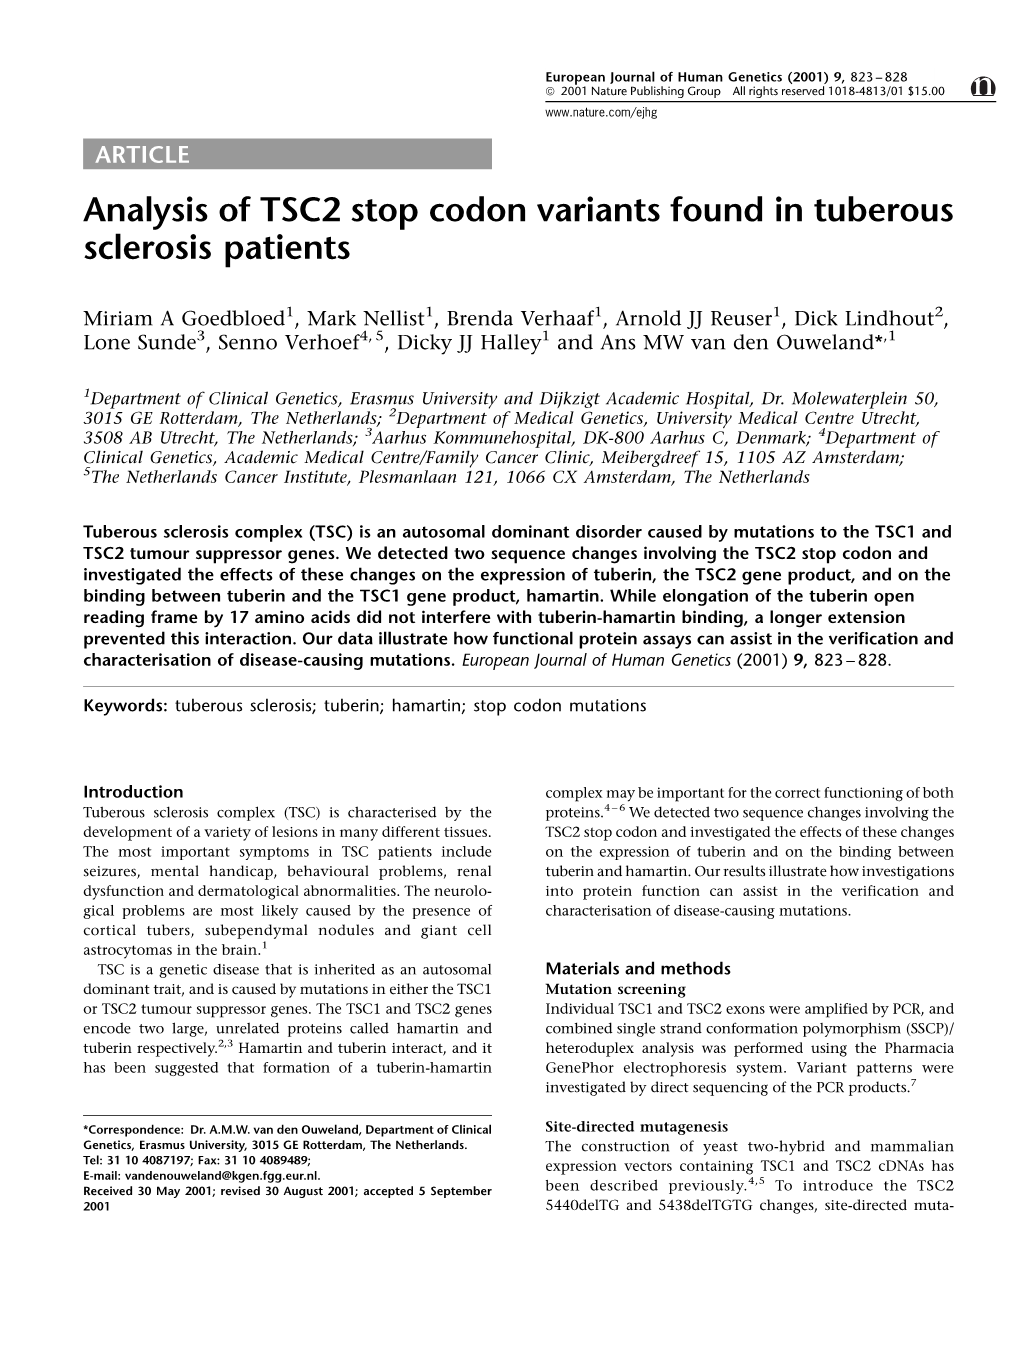 Analysis of TSC2 Stop Codon Variants Found in Tuberous Sclerosis Patients